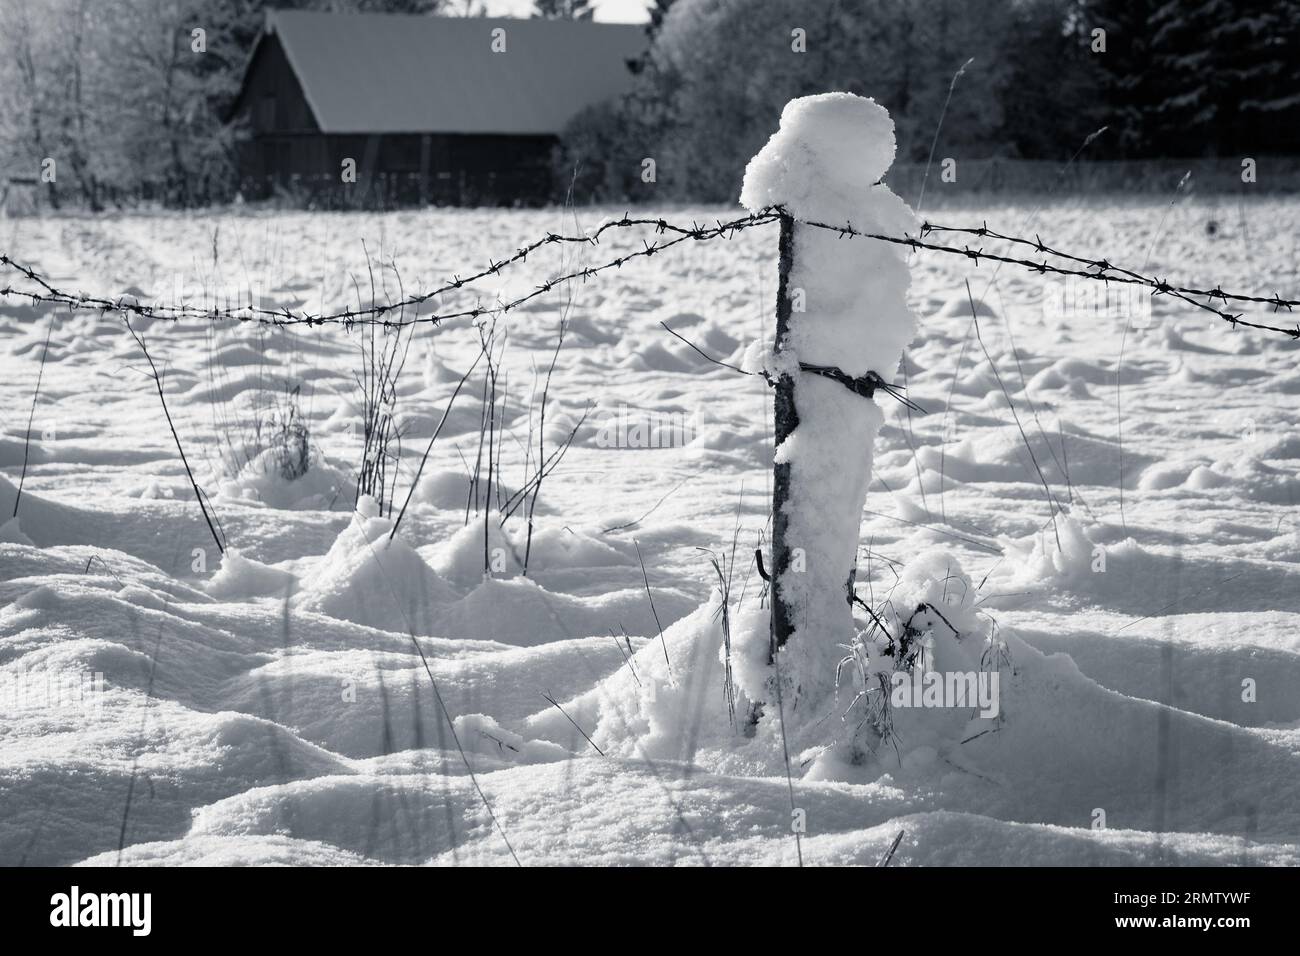 Barbed wire fence with snow - black and white photo Stock Photo